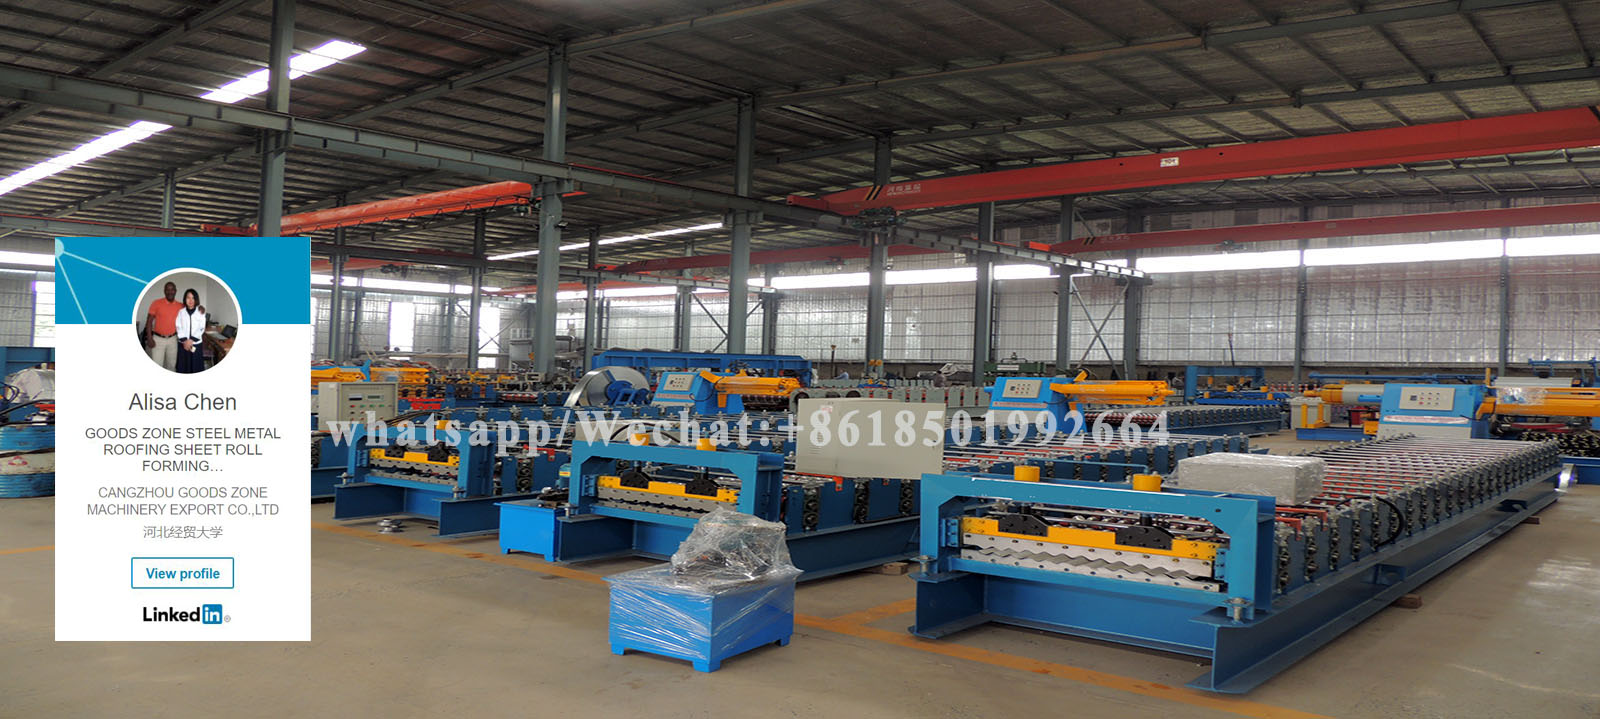 Steel roof and wall panel machine